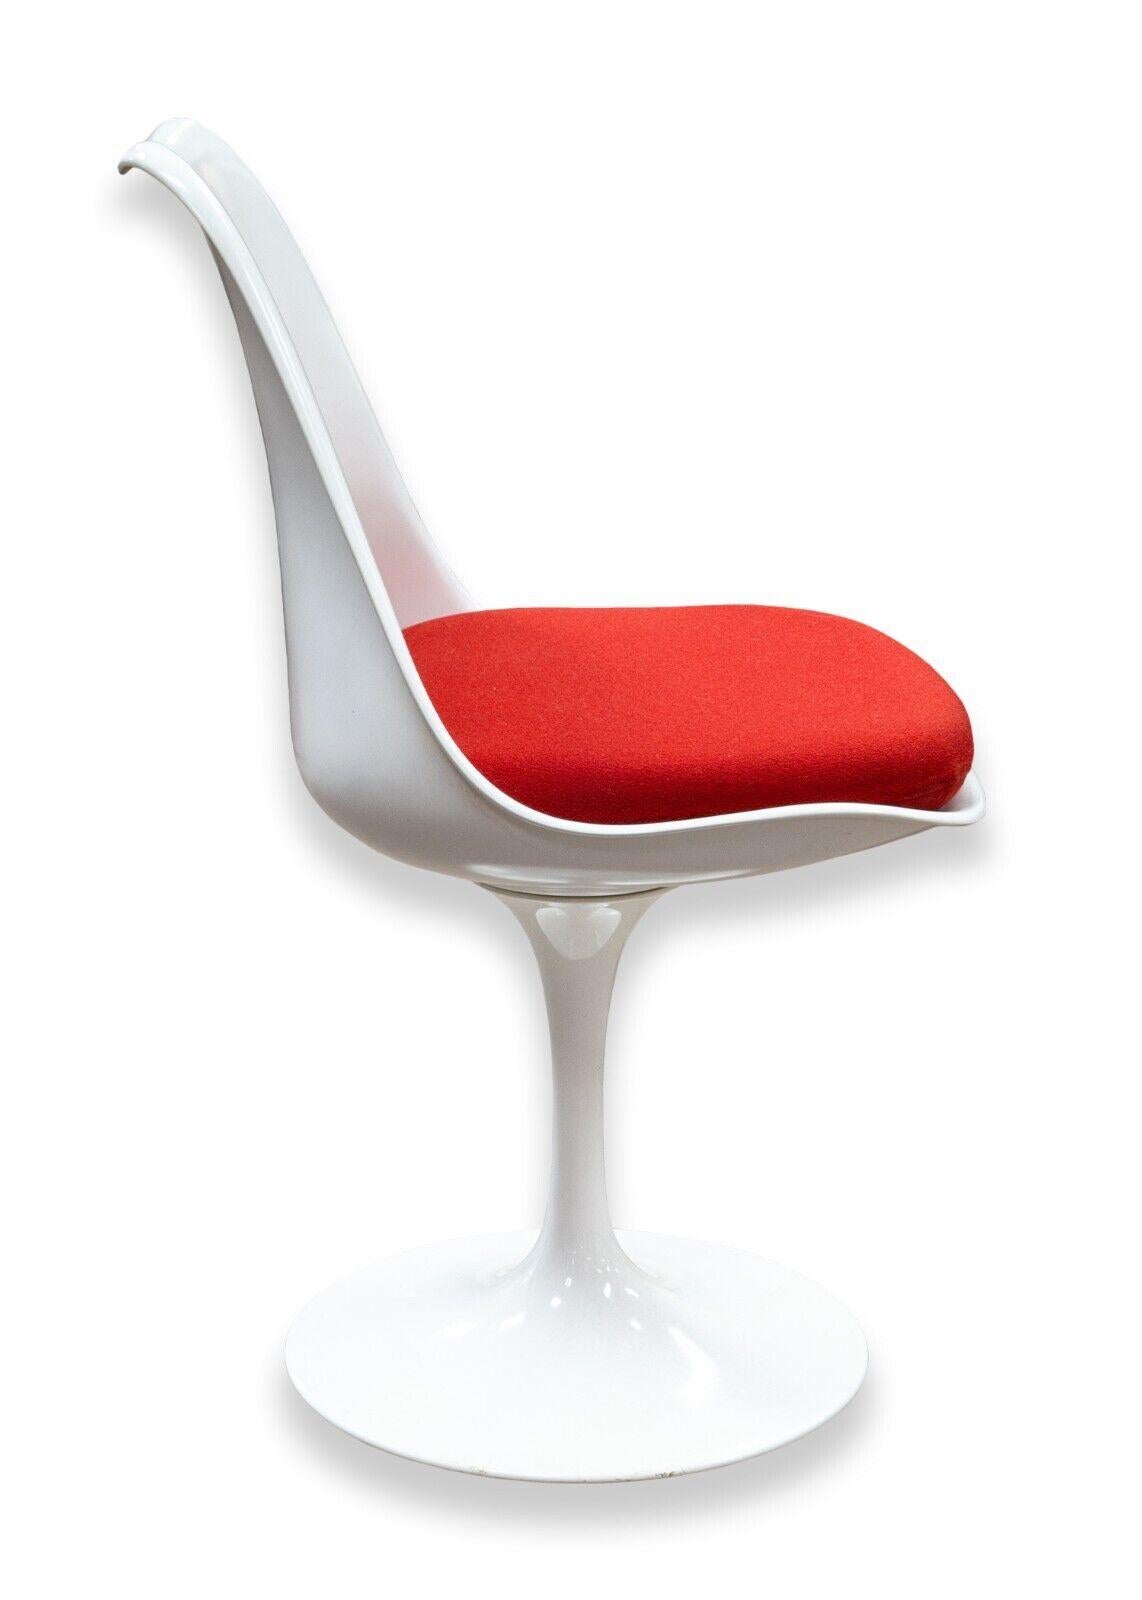 Knoll Saarinen Mid Century Modern White and Red Tulip Dining Chairs 2 Arm 4 Side 11